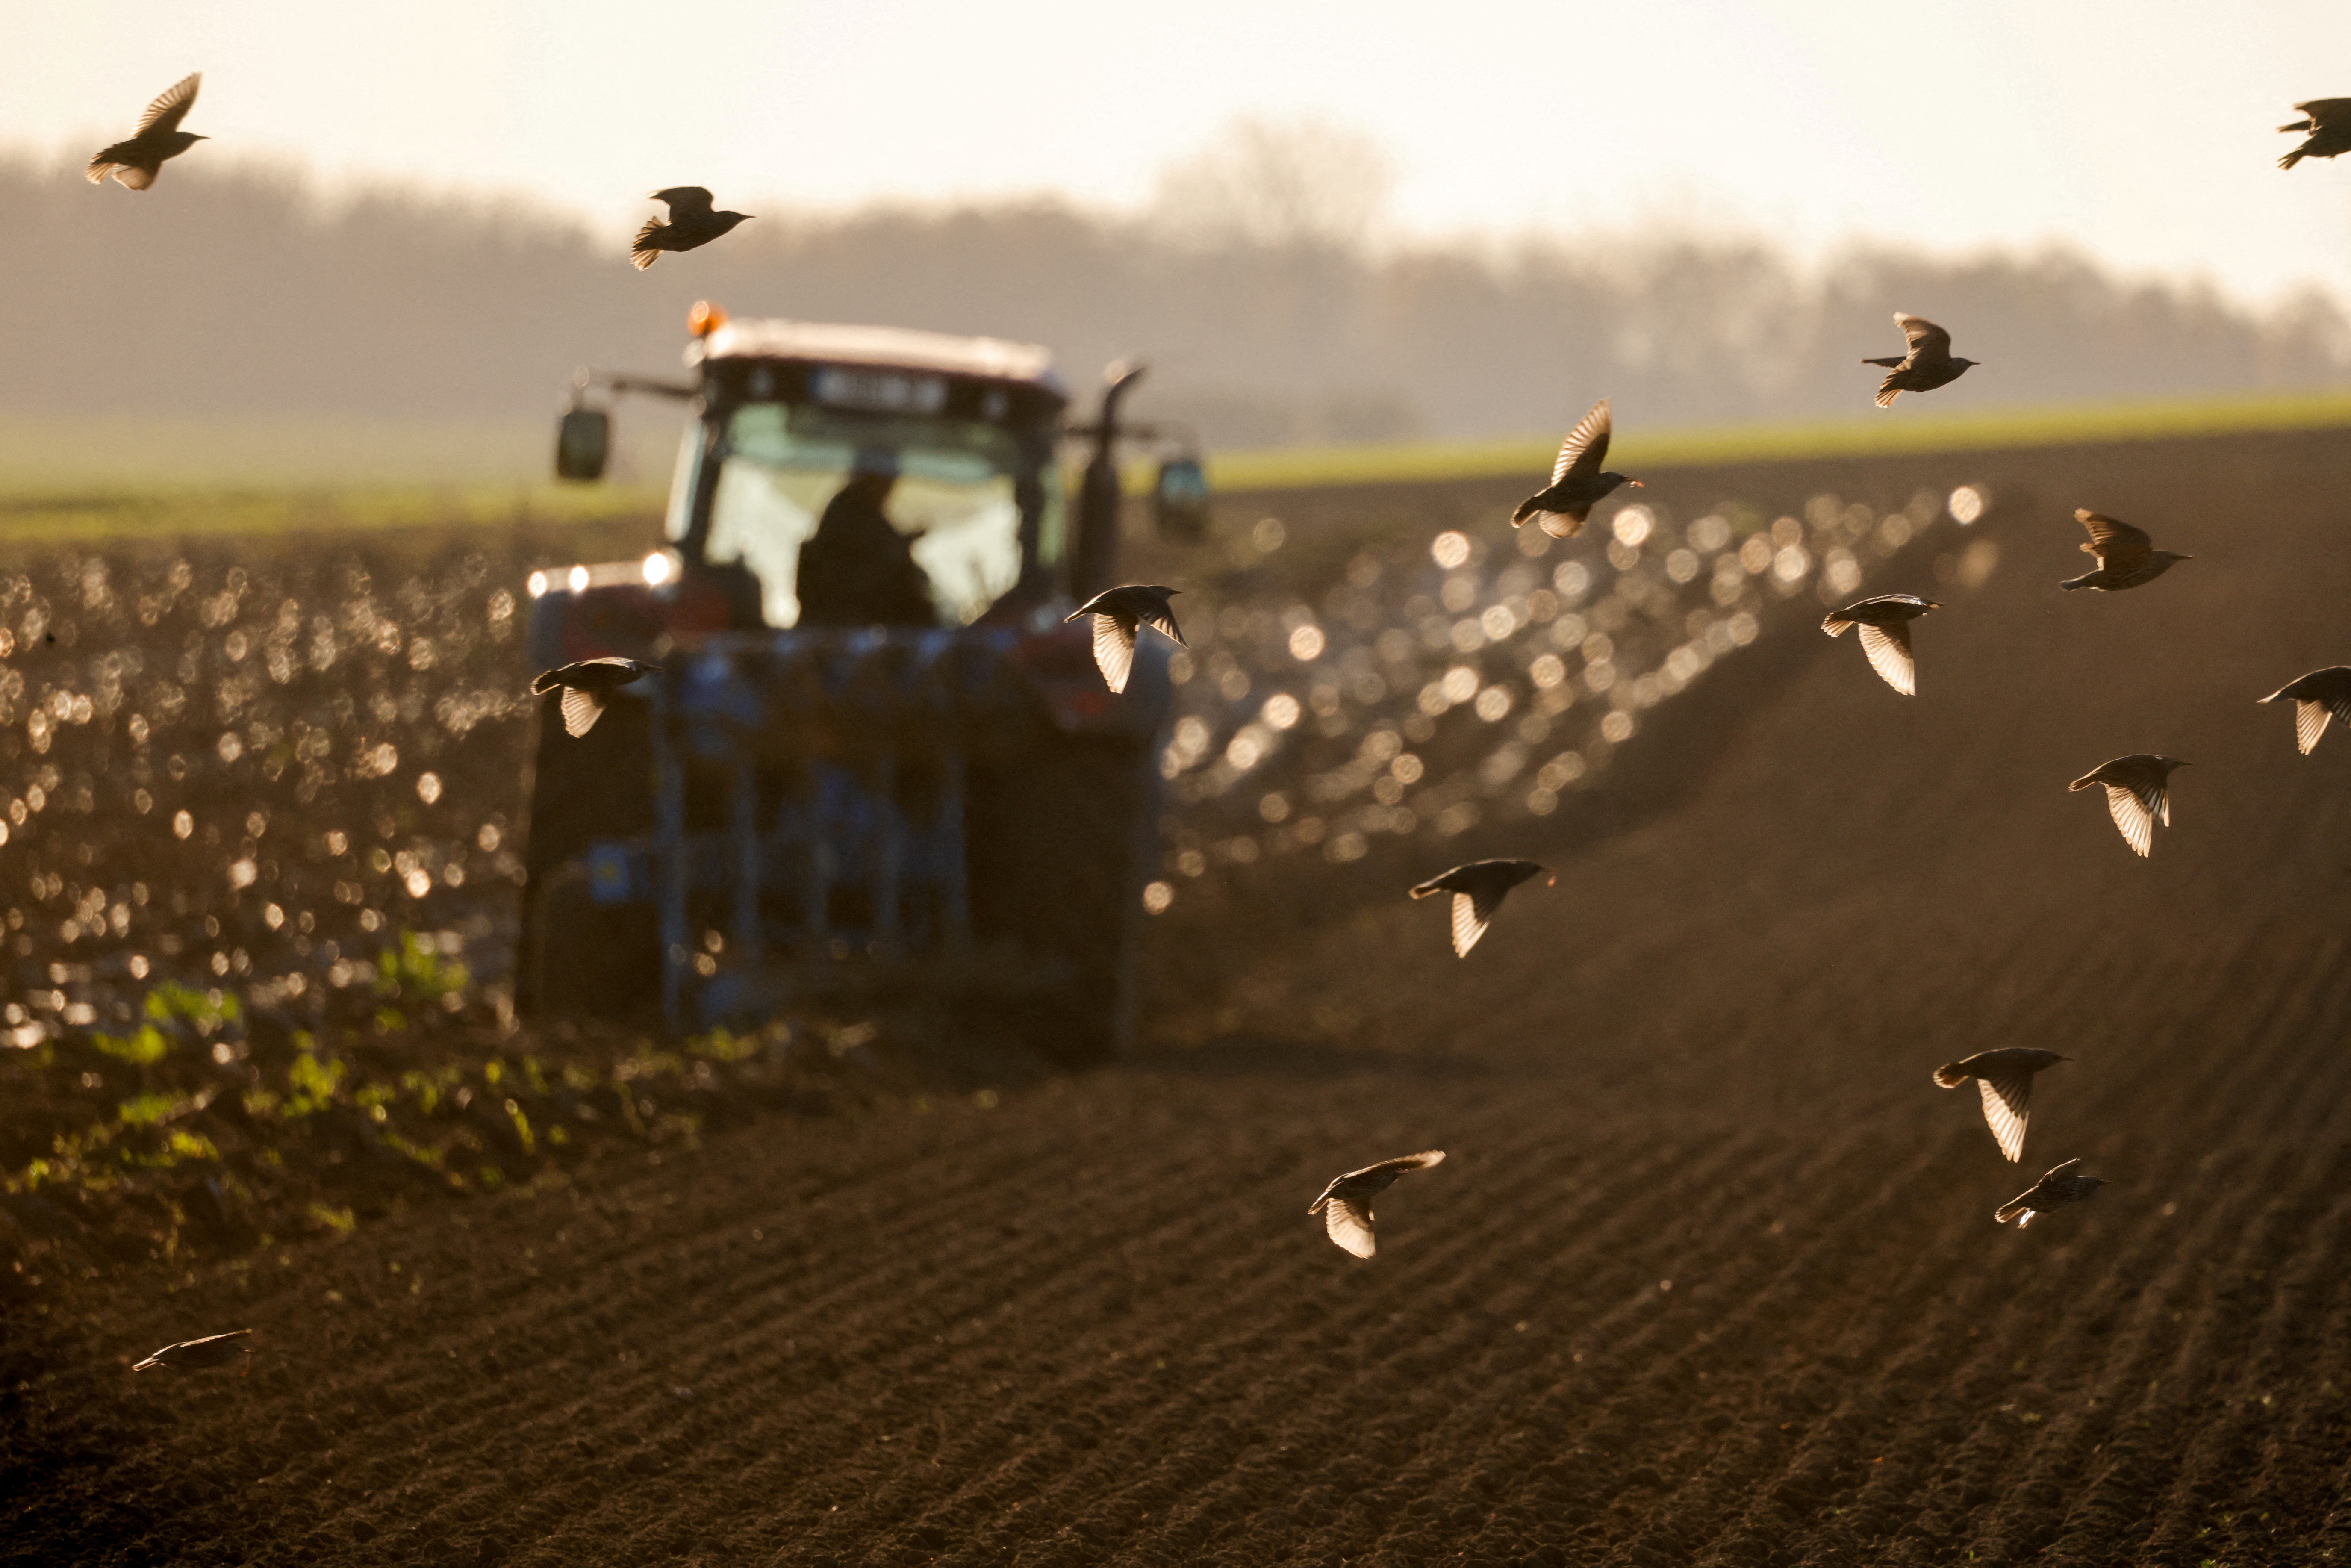 Starlings fly over a tractor as french farmer ploughs his field in Haynecourt, France, November 22, 2021. REUTERS/Pascal Rossignol/File Photo